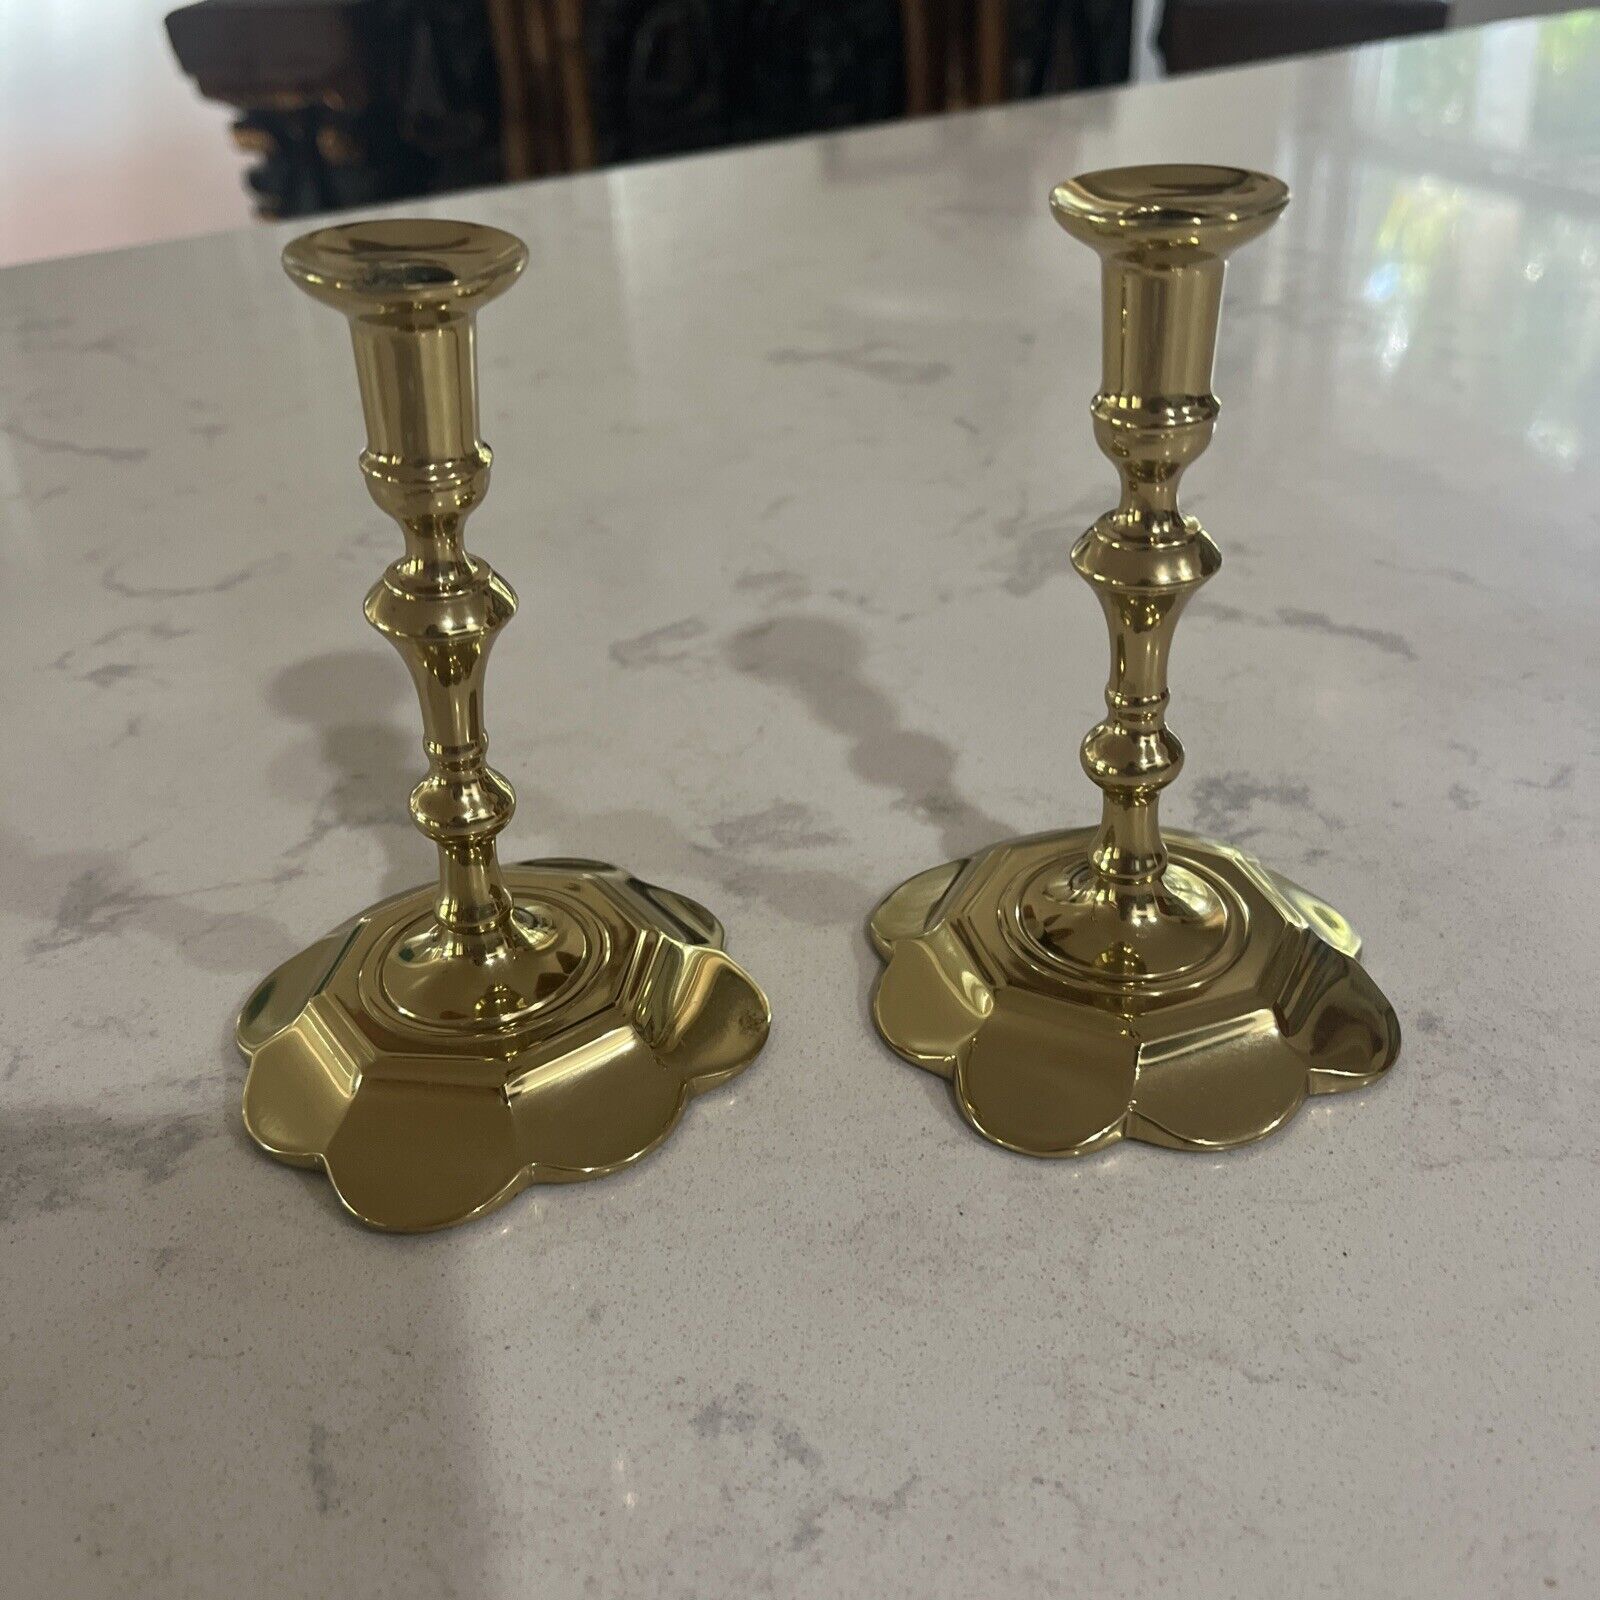 Virginia Metalcrafters Colonial Williamsburg Brass Candlestick  Holders Pair